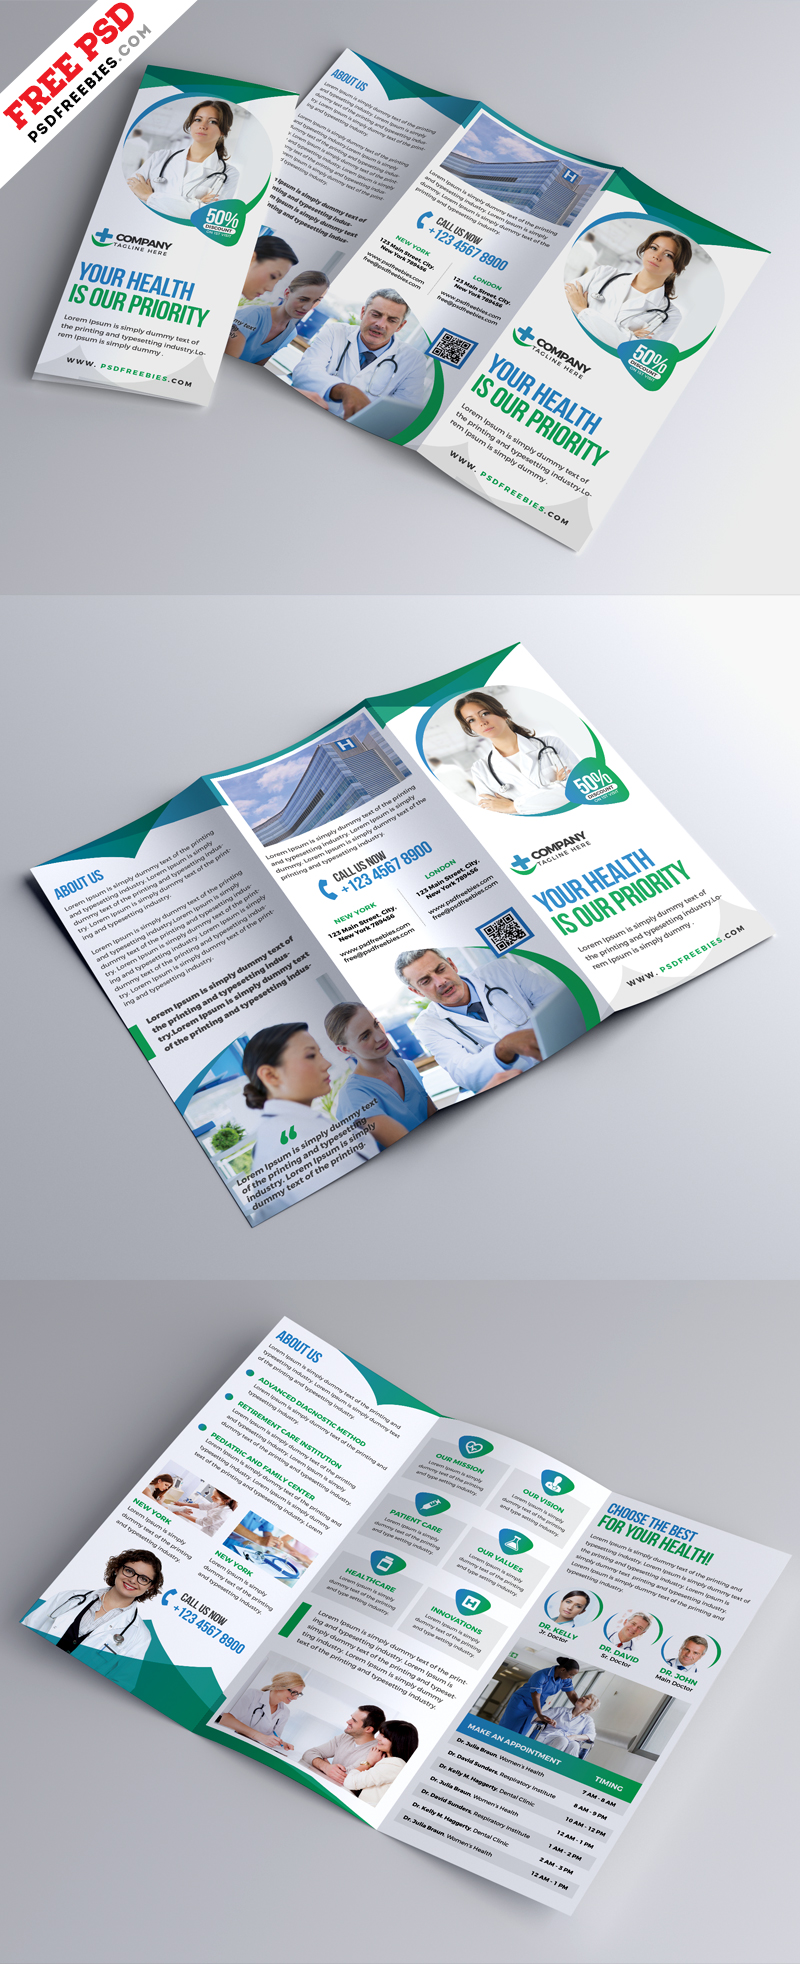 Hospital Medical Business Trifold Brochure PSD Free Download